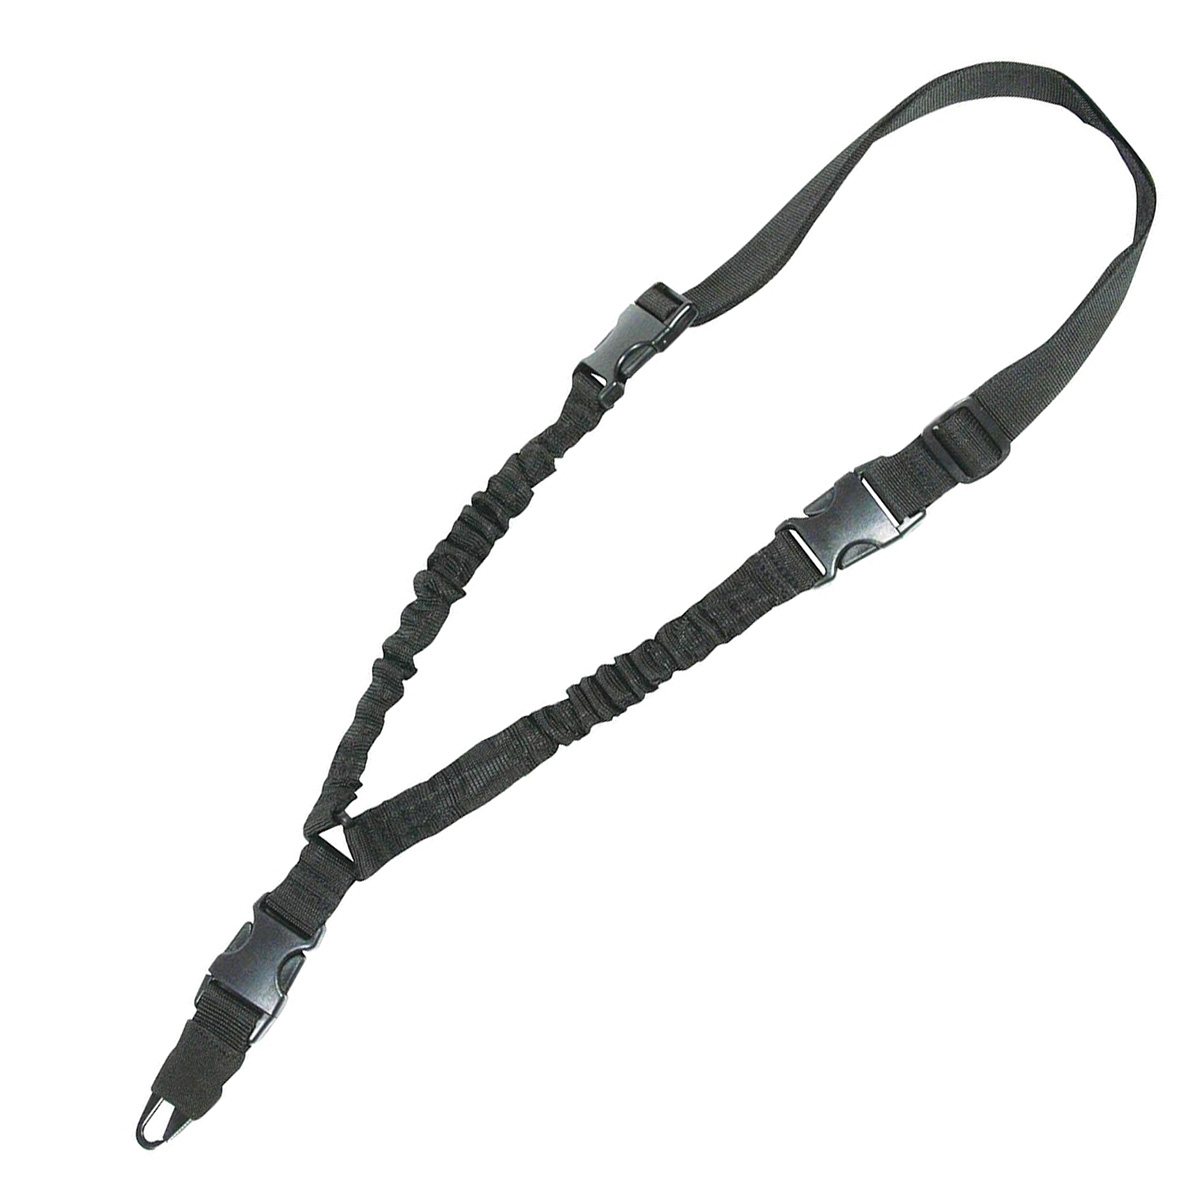 Viper Tactical Single Point Bungee Sling - Black